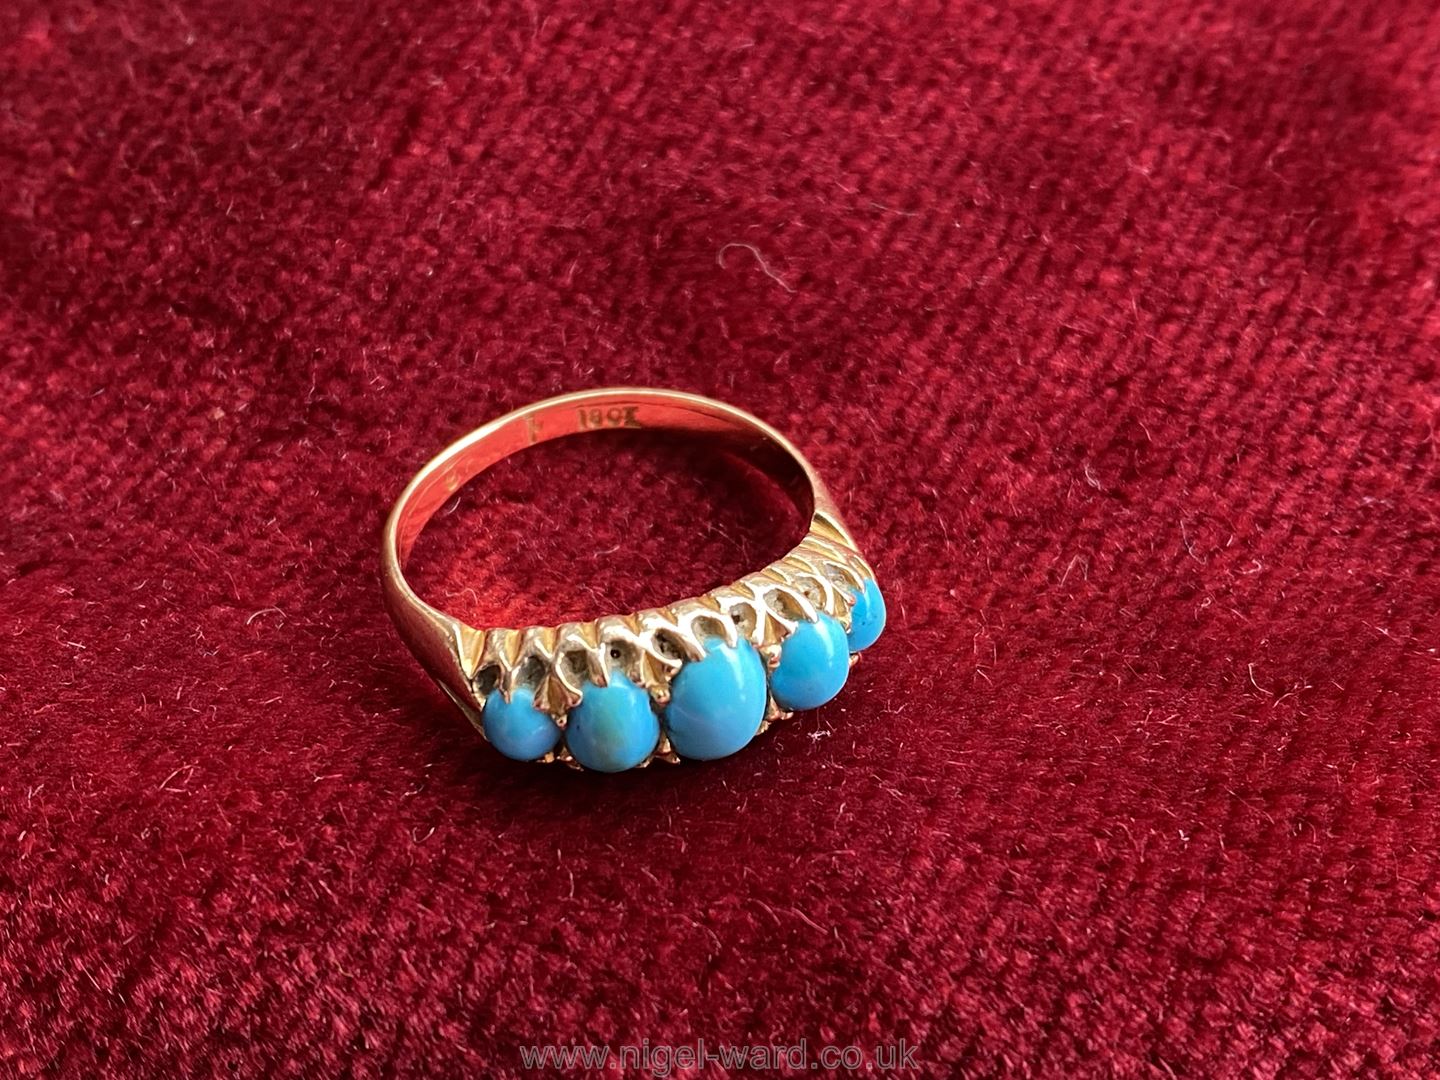 An 18 ct gold Ring set with five turquoise graduated stones, - Image 5 of 5